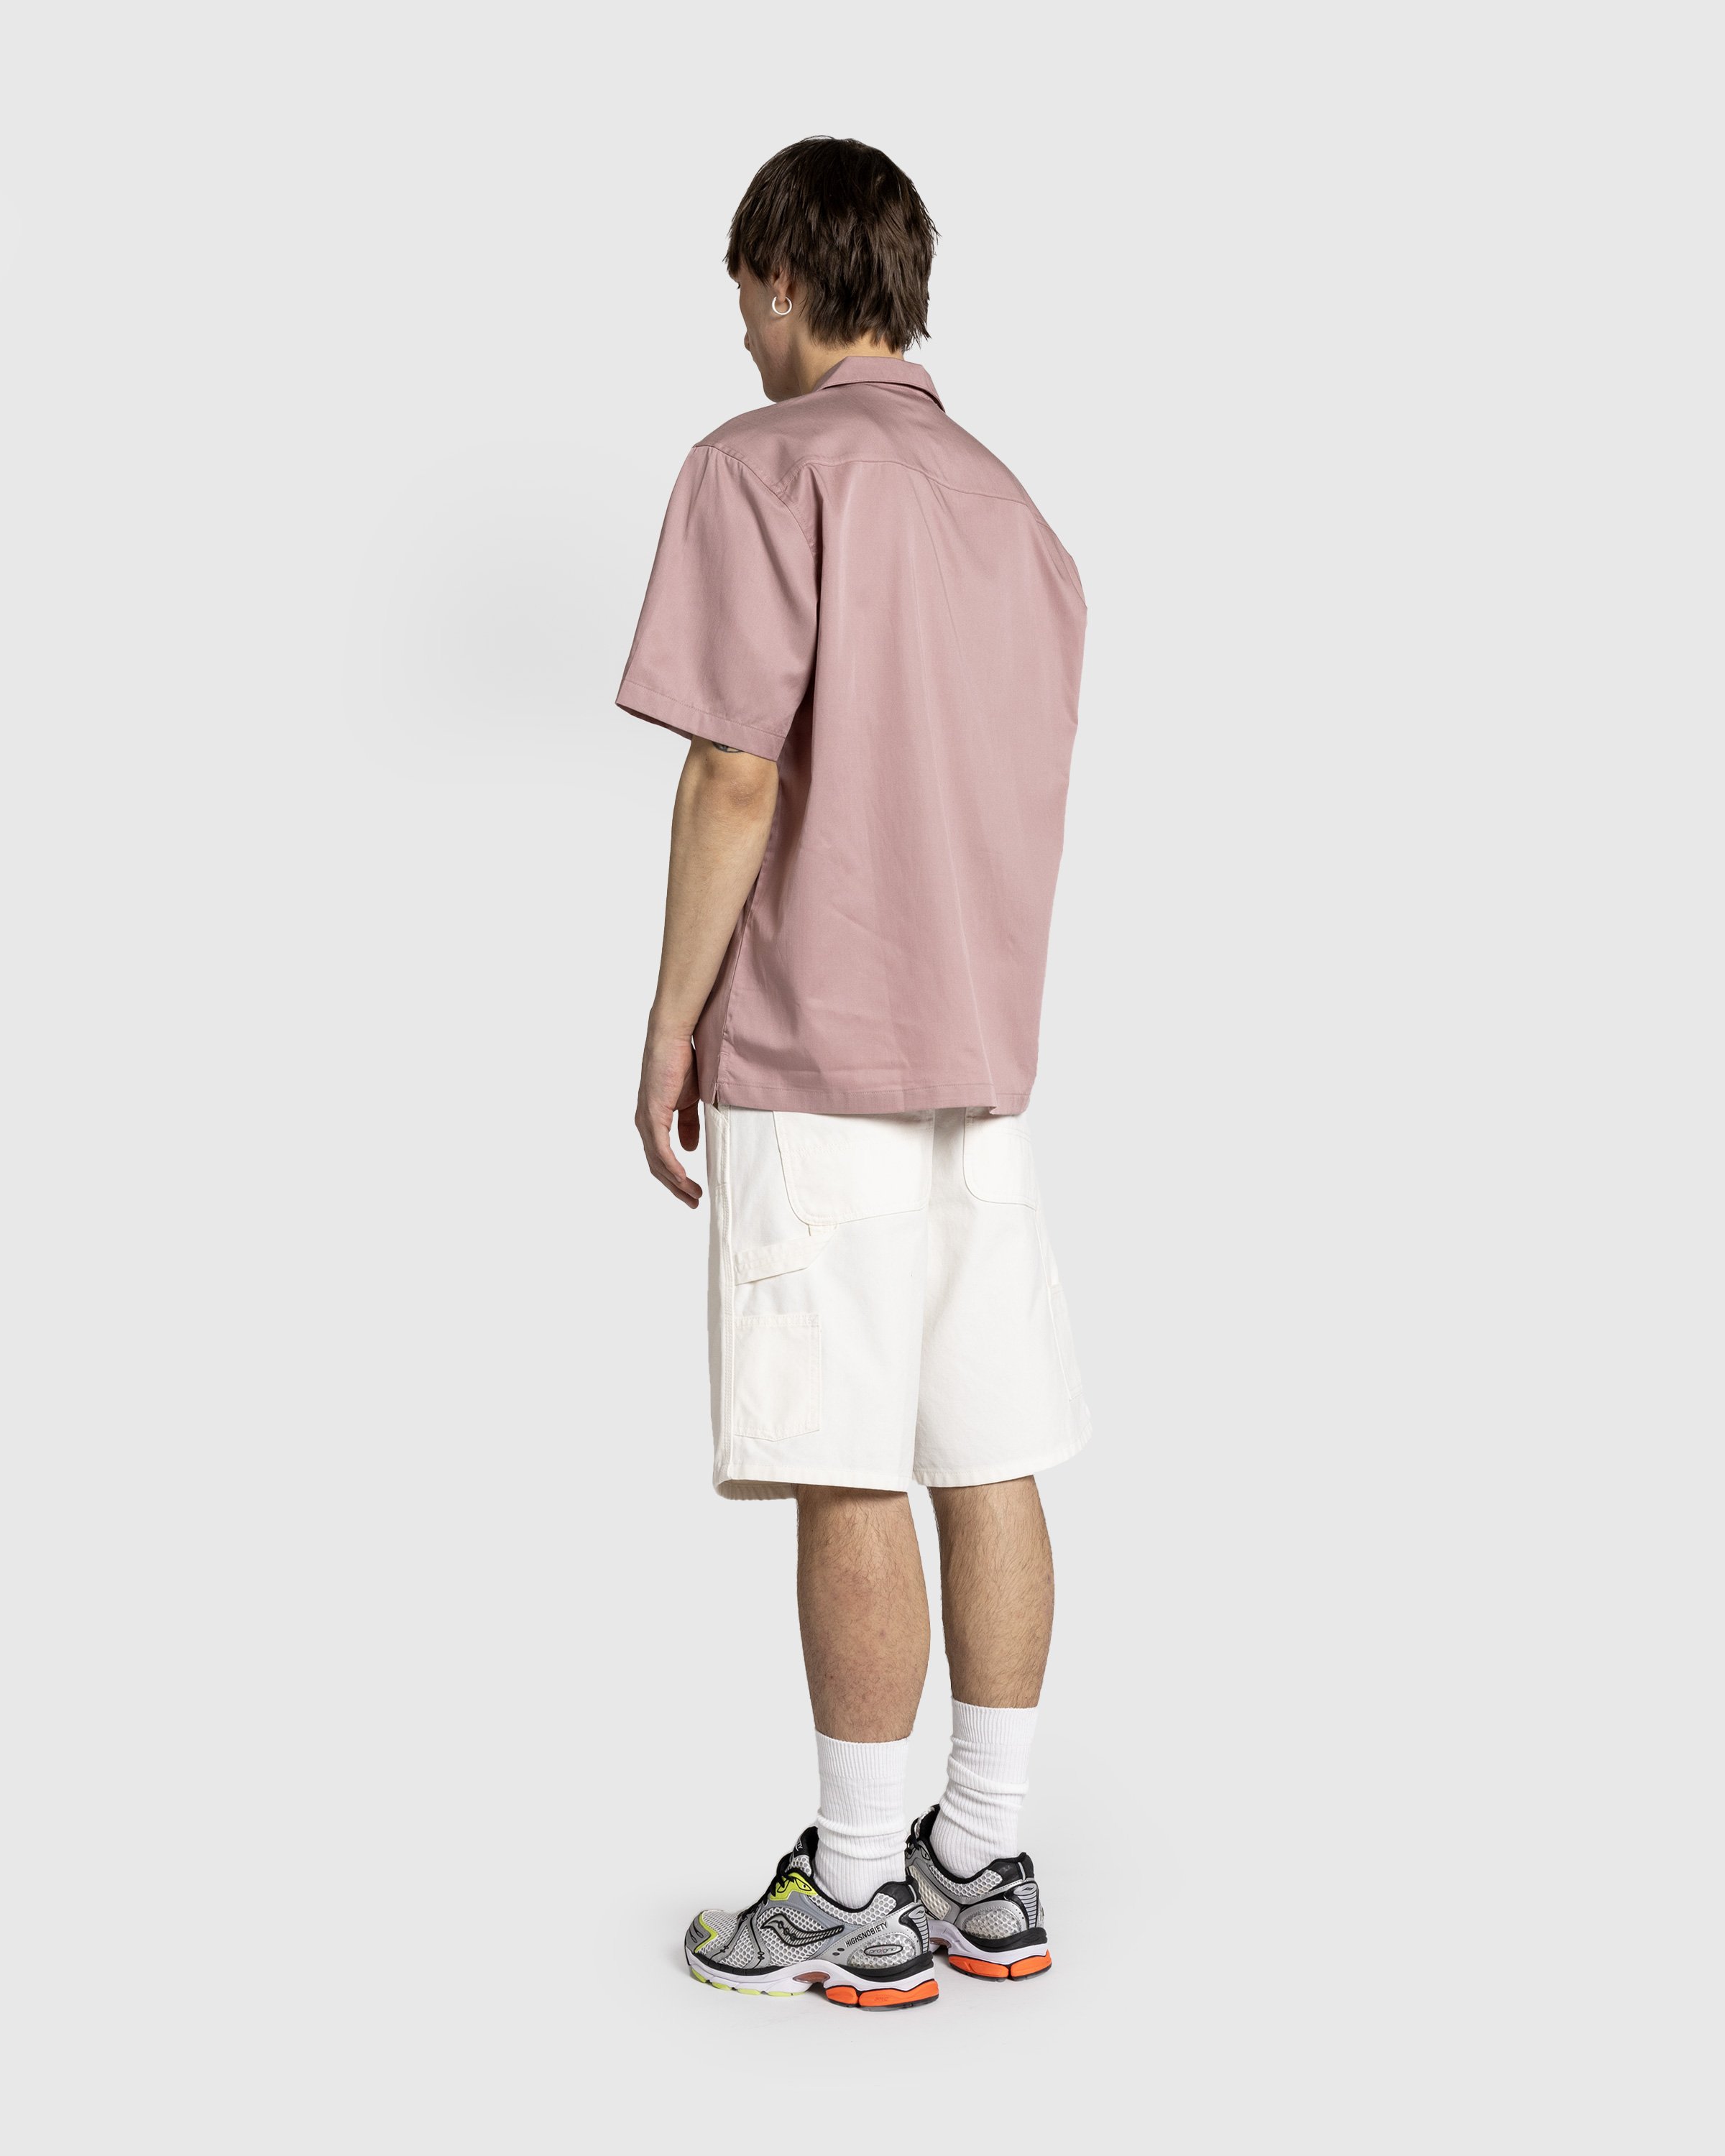 Carhartt WIP - Double Knee Short Wax /rinsed - Clothing - White - Image 4